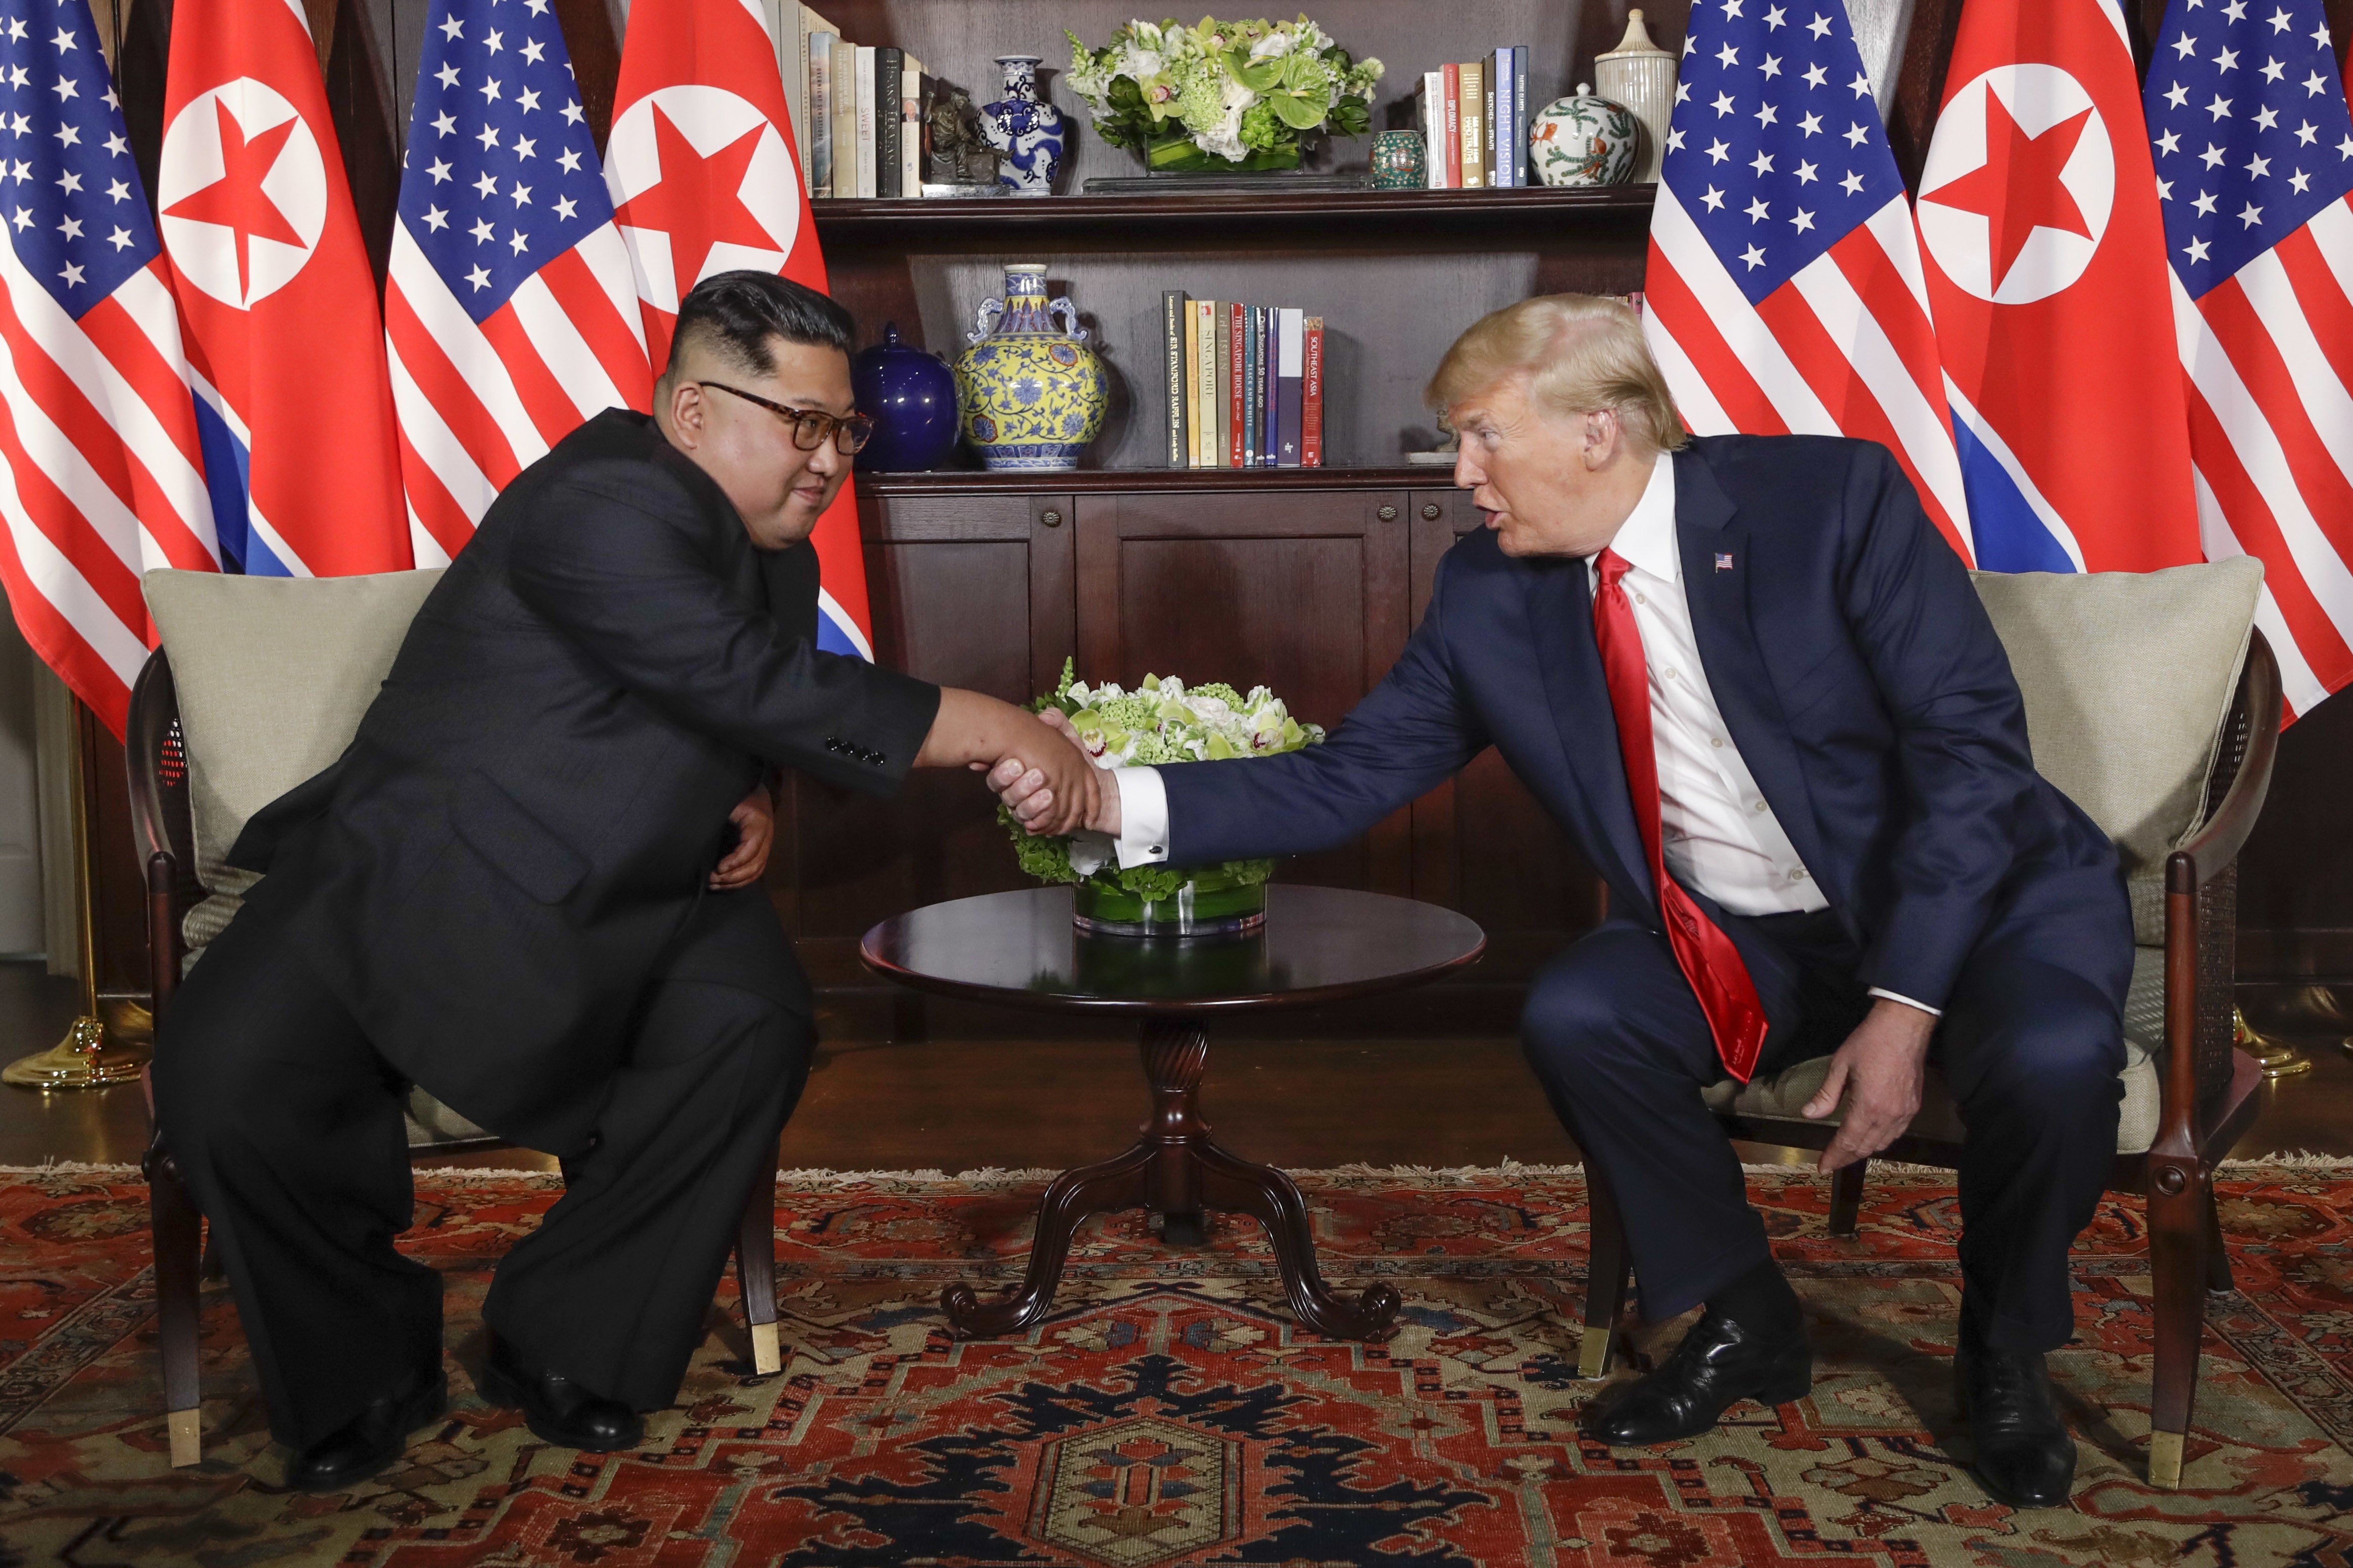 North Korea leader Kim Jong-un and US President Donald Trump shake hands during their meeting in Singapore on June 12. The historic summit drew the eyes of the world, but was criticised for resulting in no significant progress on North Korean denuclearisation. Photo: AP